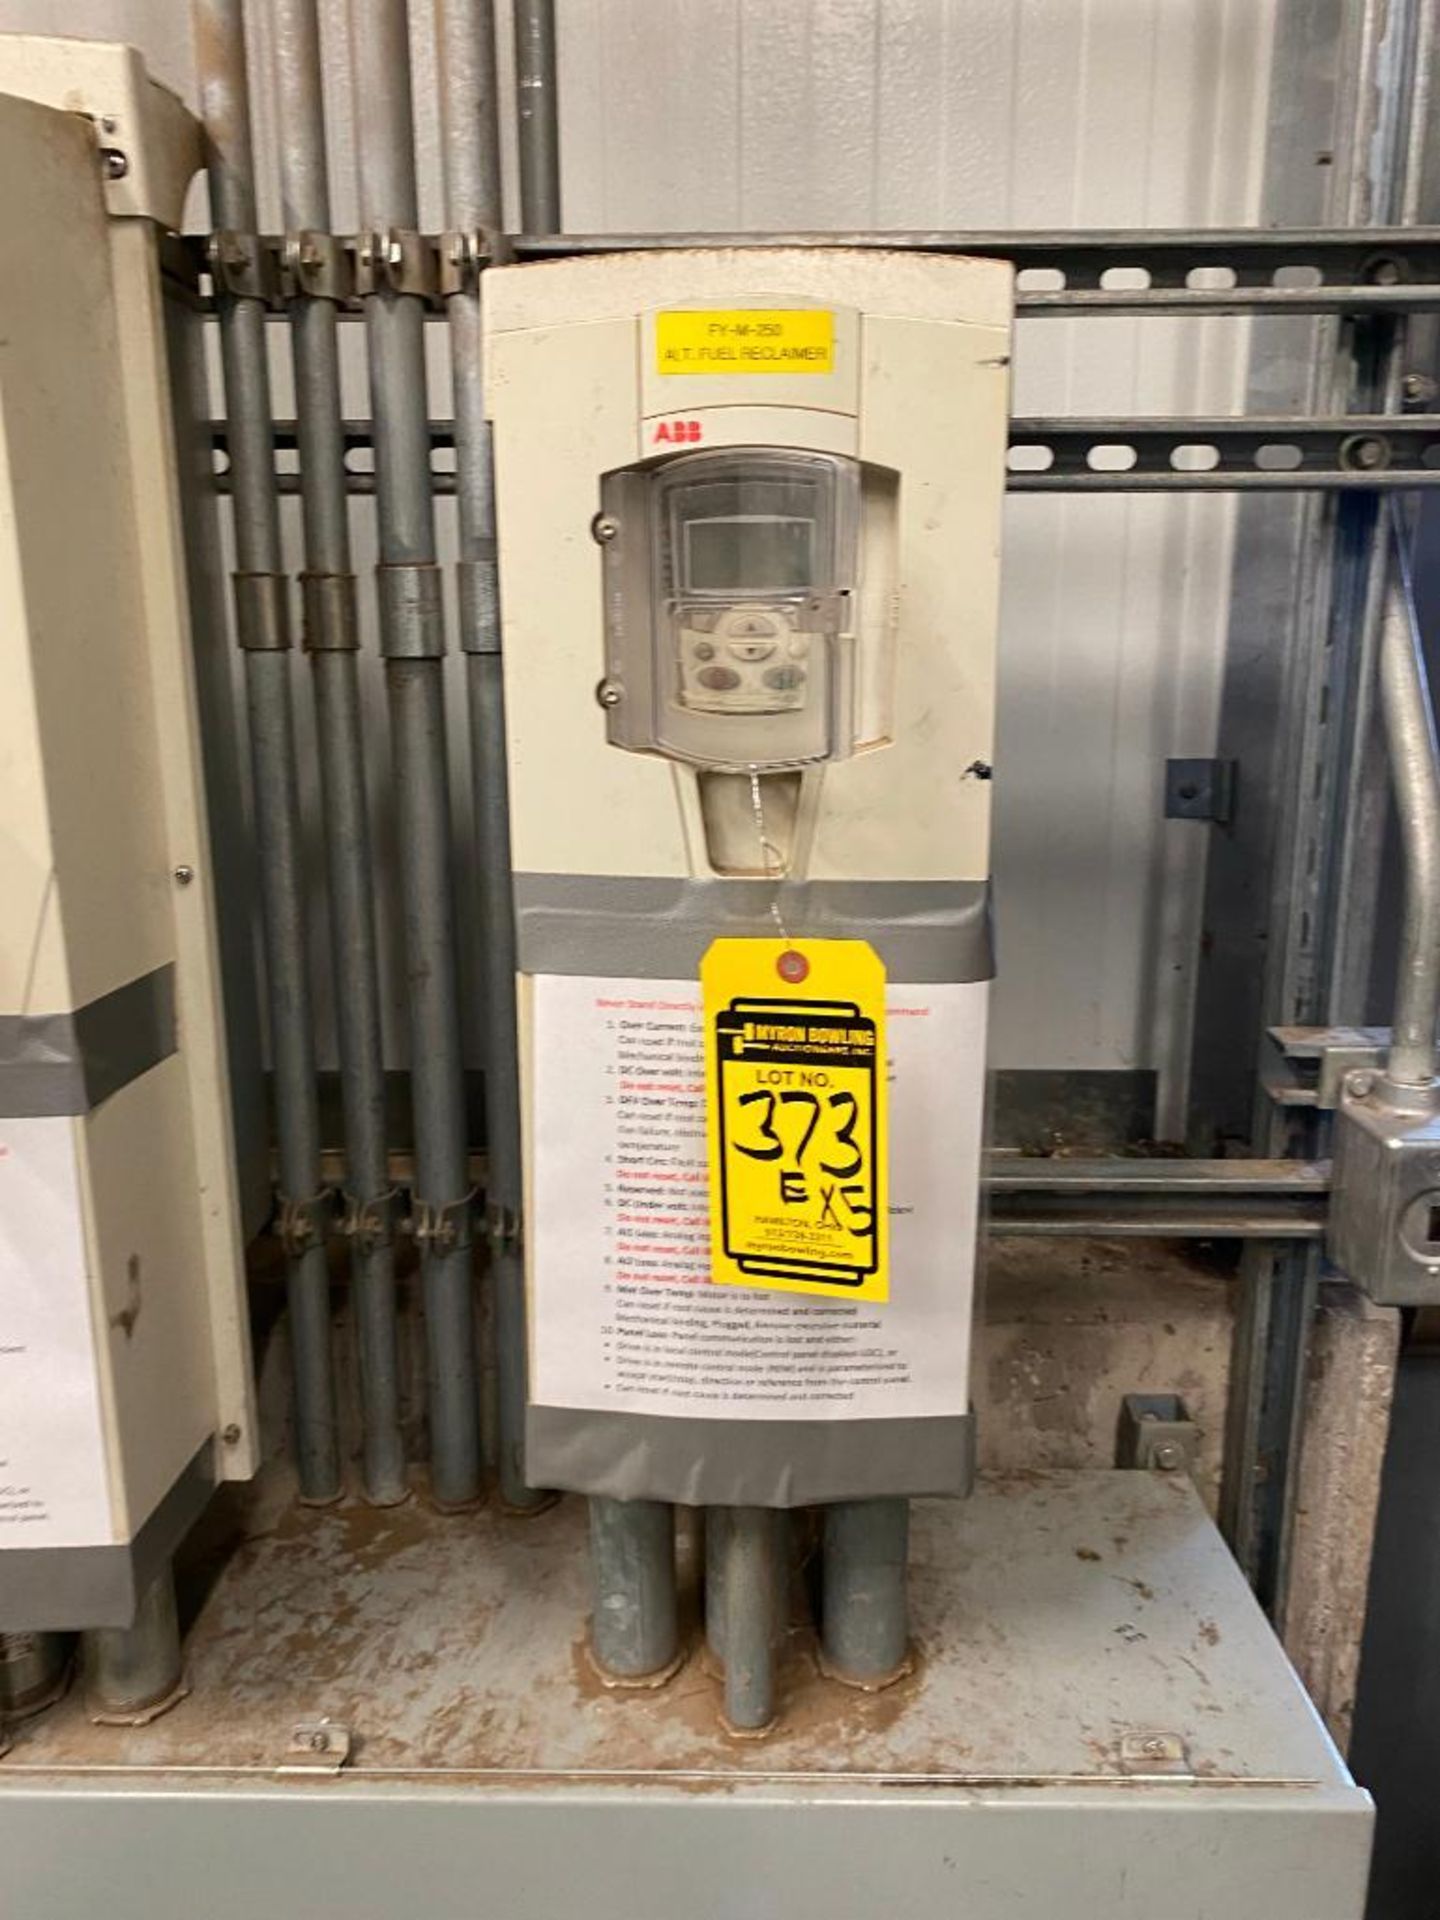 (5) ABB ACS 550 Drives, 0.75-132 KW, 1-200 HP (Buyer must disconnect or cut electrical wires and cab